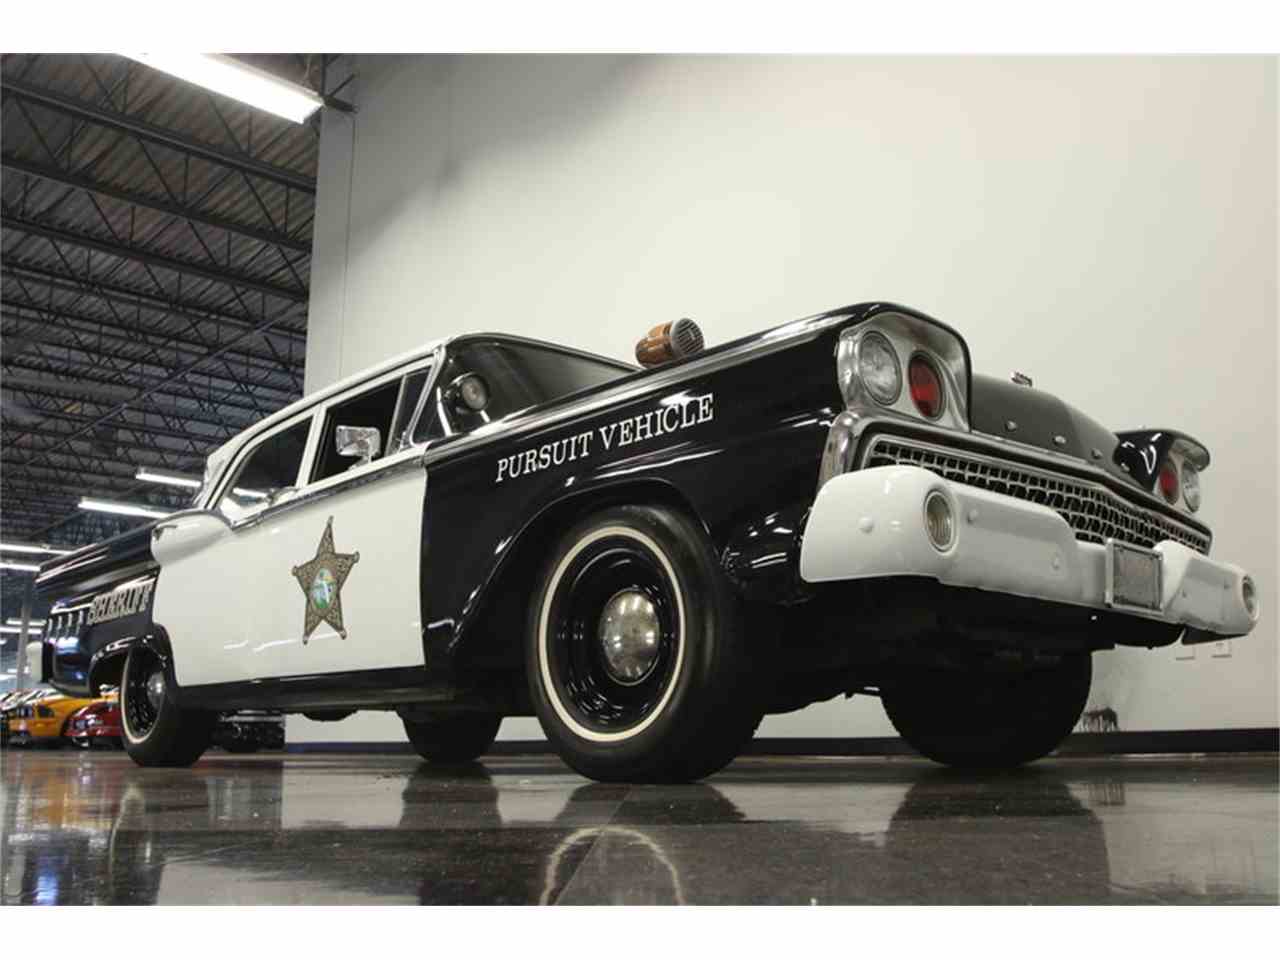 1959 Ford Galaxie Police Car for Sale | ClassicCars.com ...